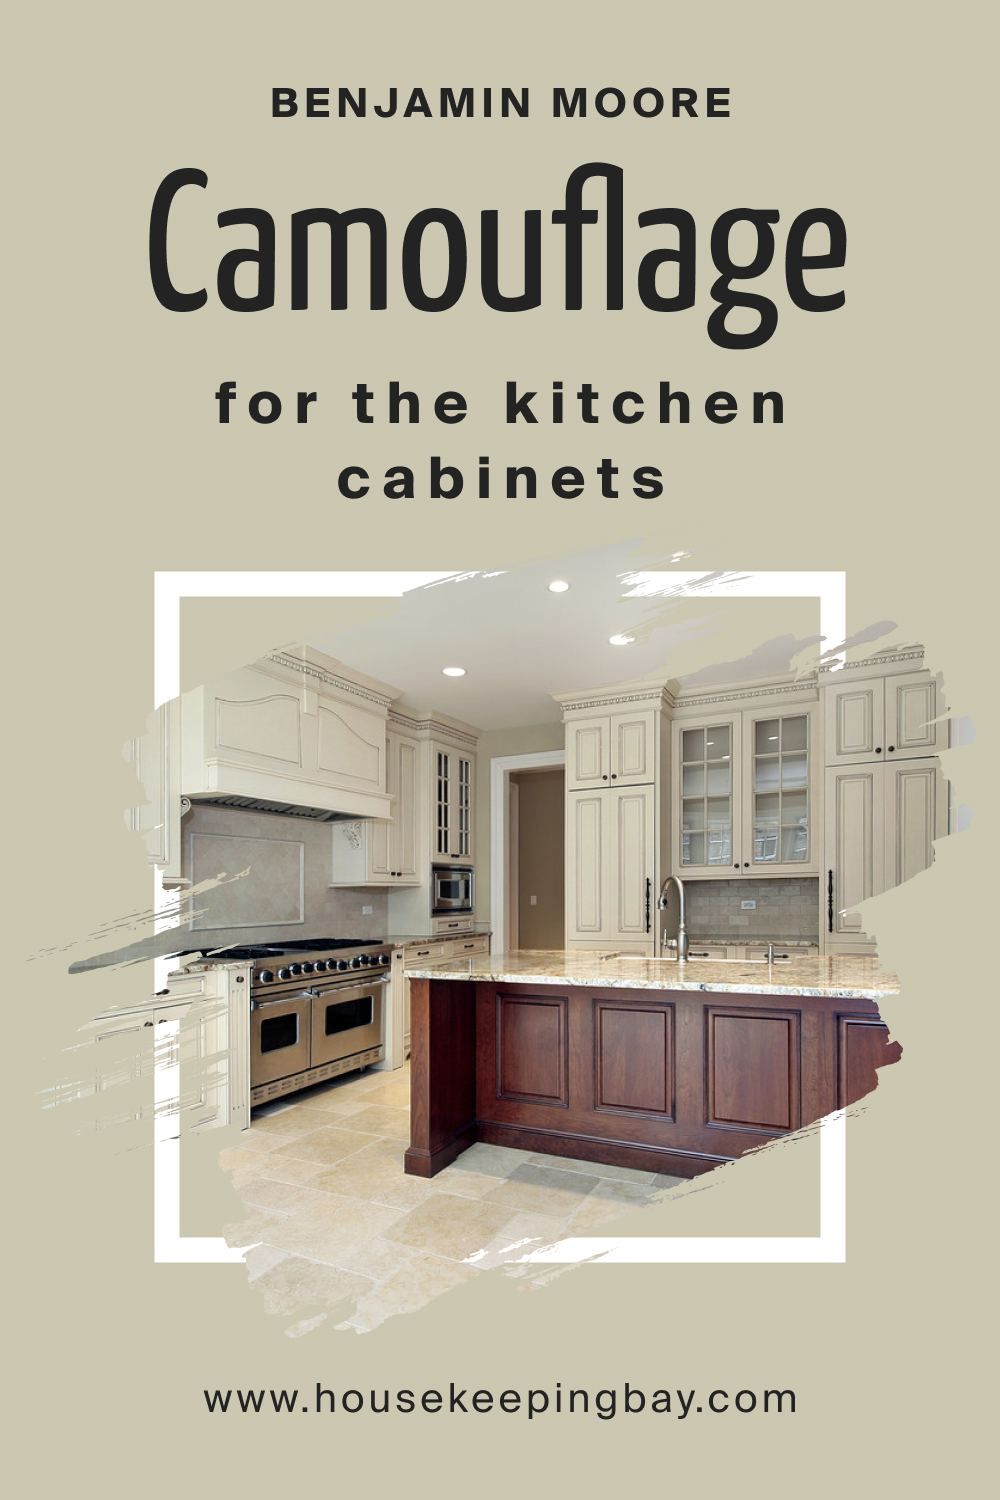 How to Use BM Camouflage 2143-40 on Kitchen Cabinets?